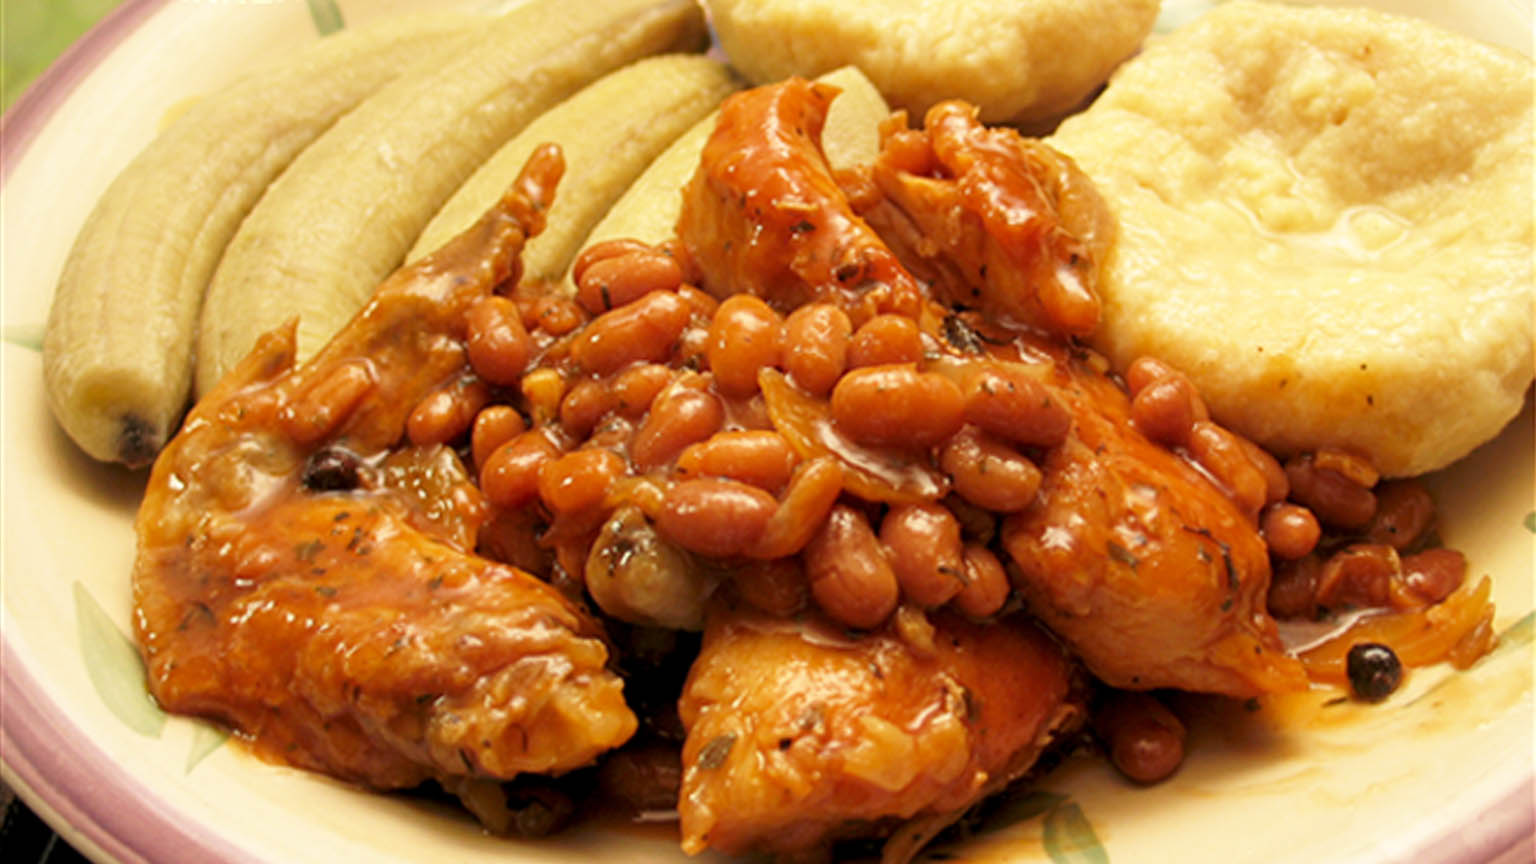 Baked Beans and Chicken